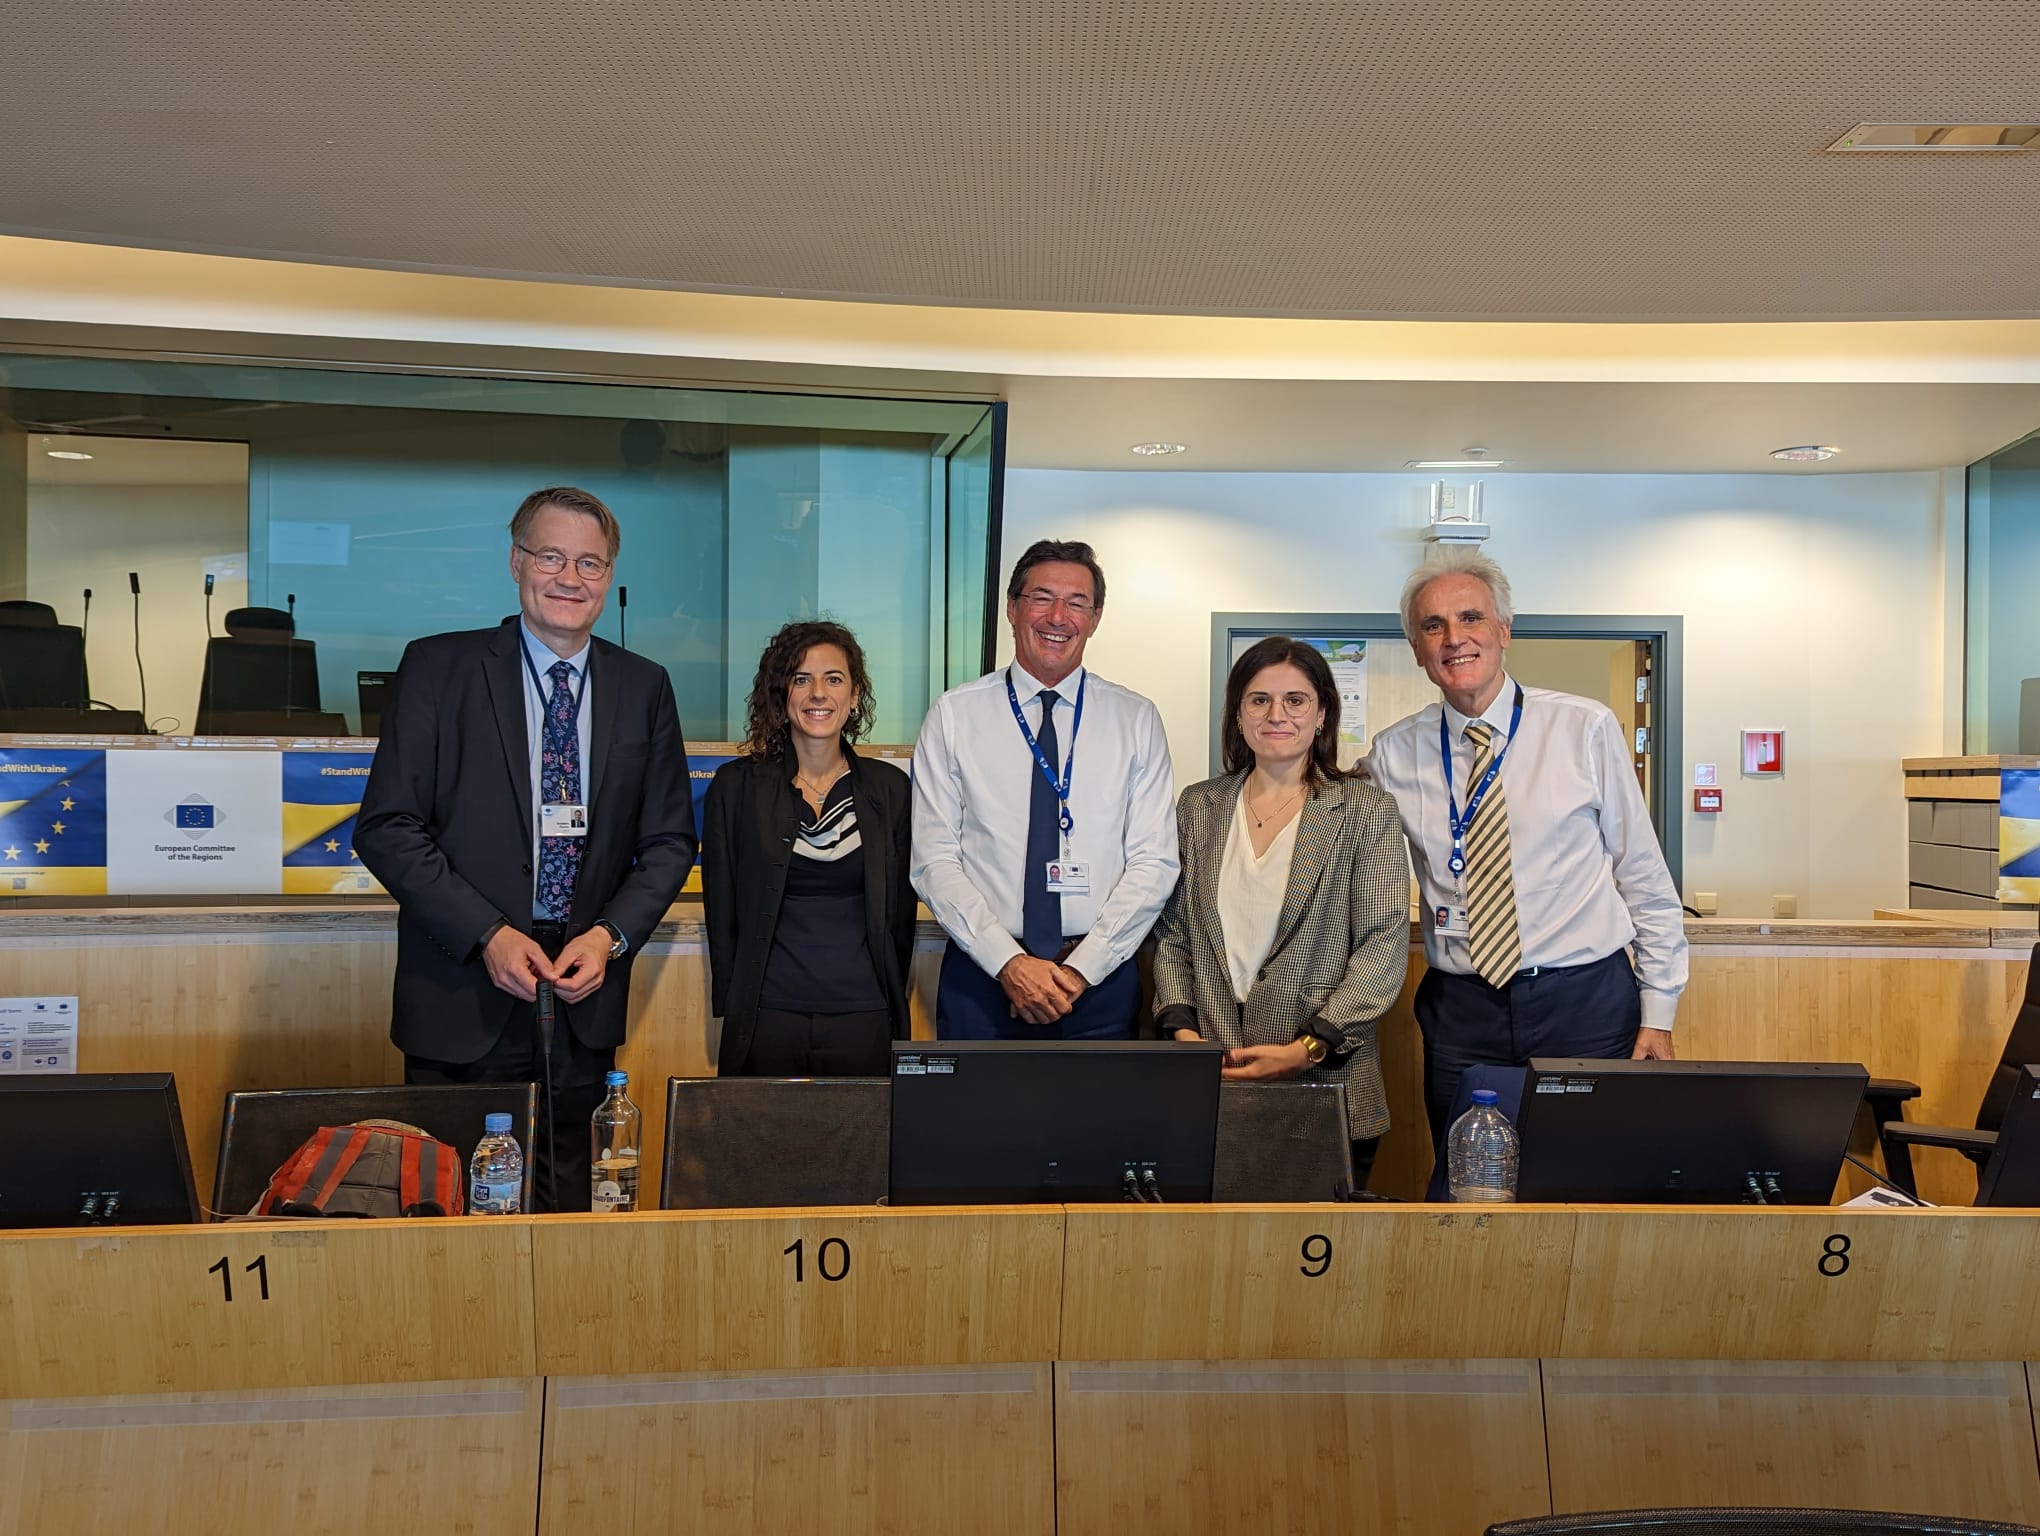 Thomas Wobben (Director European Committee of the Regions), Guia Bianchi (Policy analyst, Joint Research Centre), Mikel Landabaso (Director Joint Research Centre), Hannah Schmidberger (Policy analyst, Joint Research Centre), Xabier Goenaga (Head of Unit, Joint Research Centre).